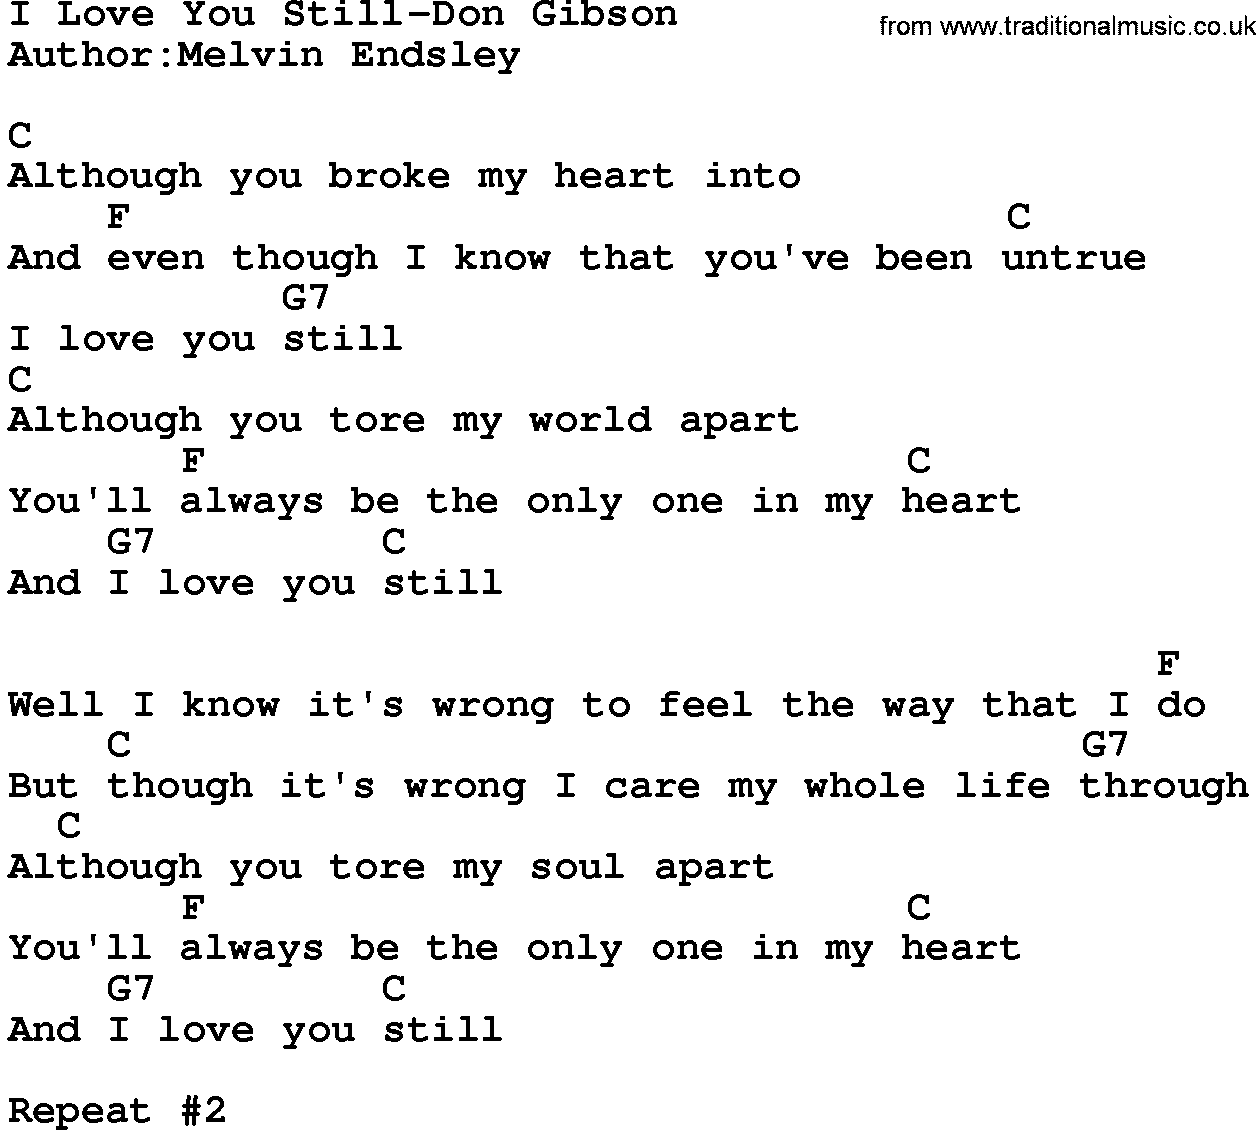 Country music song: I Love You Still-Don Gibson lyrics and chords